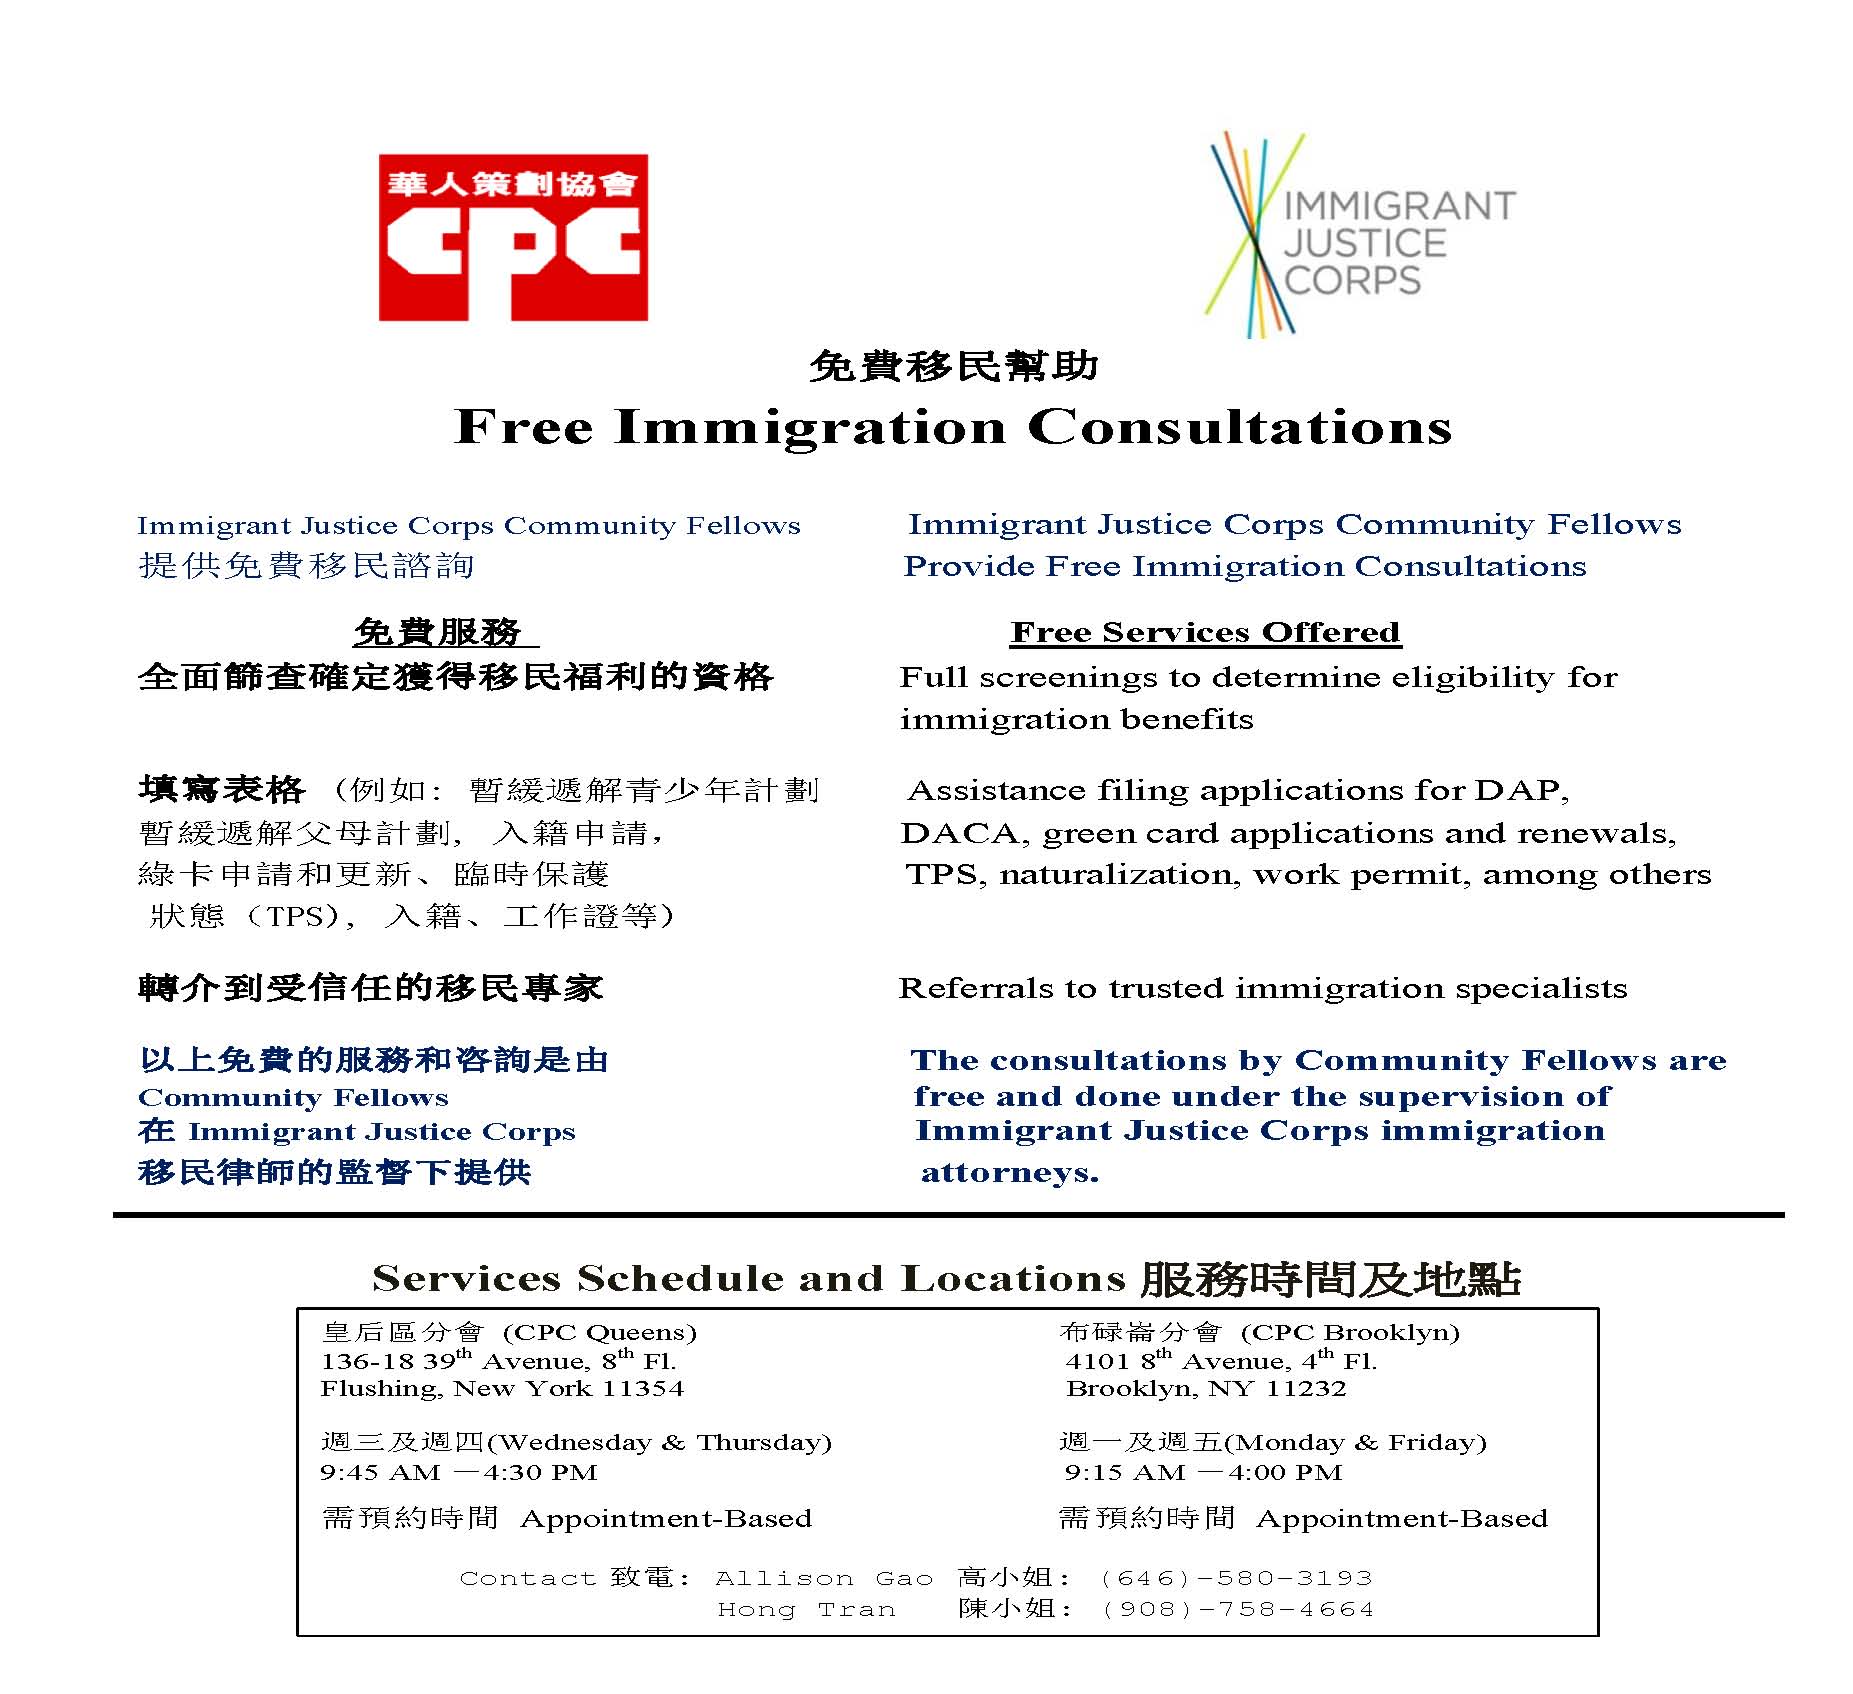 Free Immigration Consultations | Chinese-American Planning Council1853 x 1694